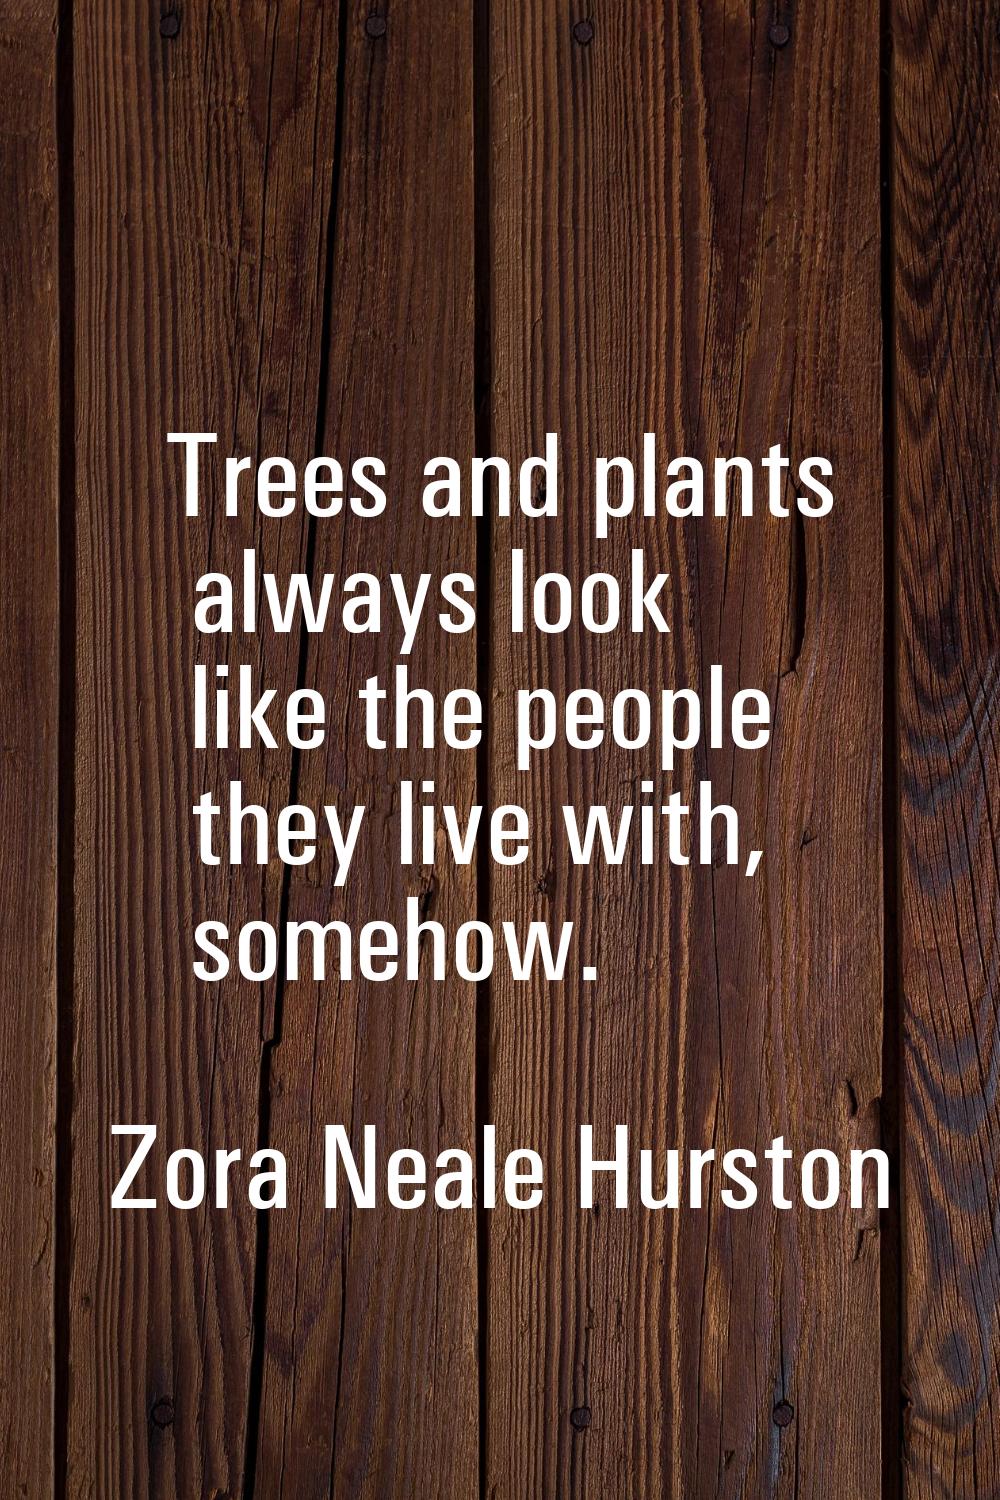 Trees and plants always look like the people they live with, somehow.